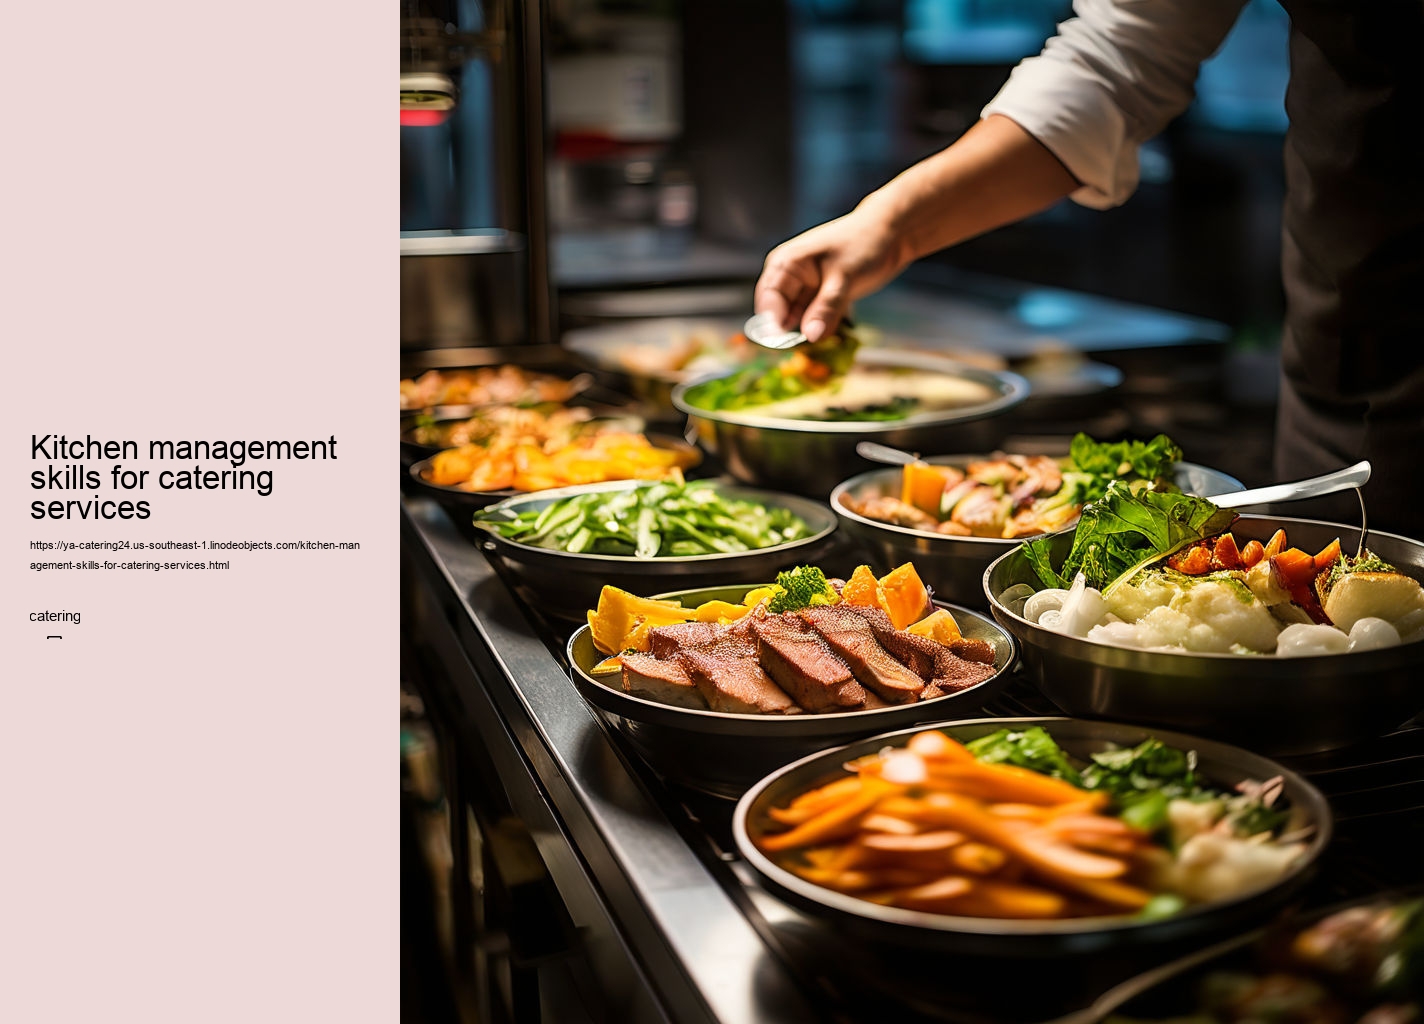 Kitchen management skills for catering services